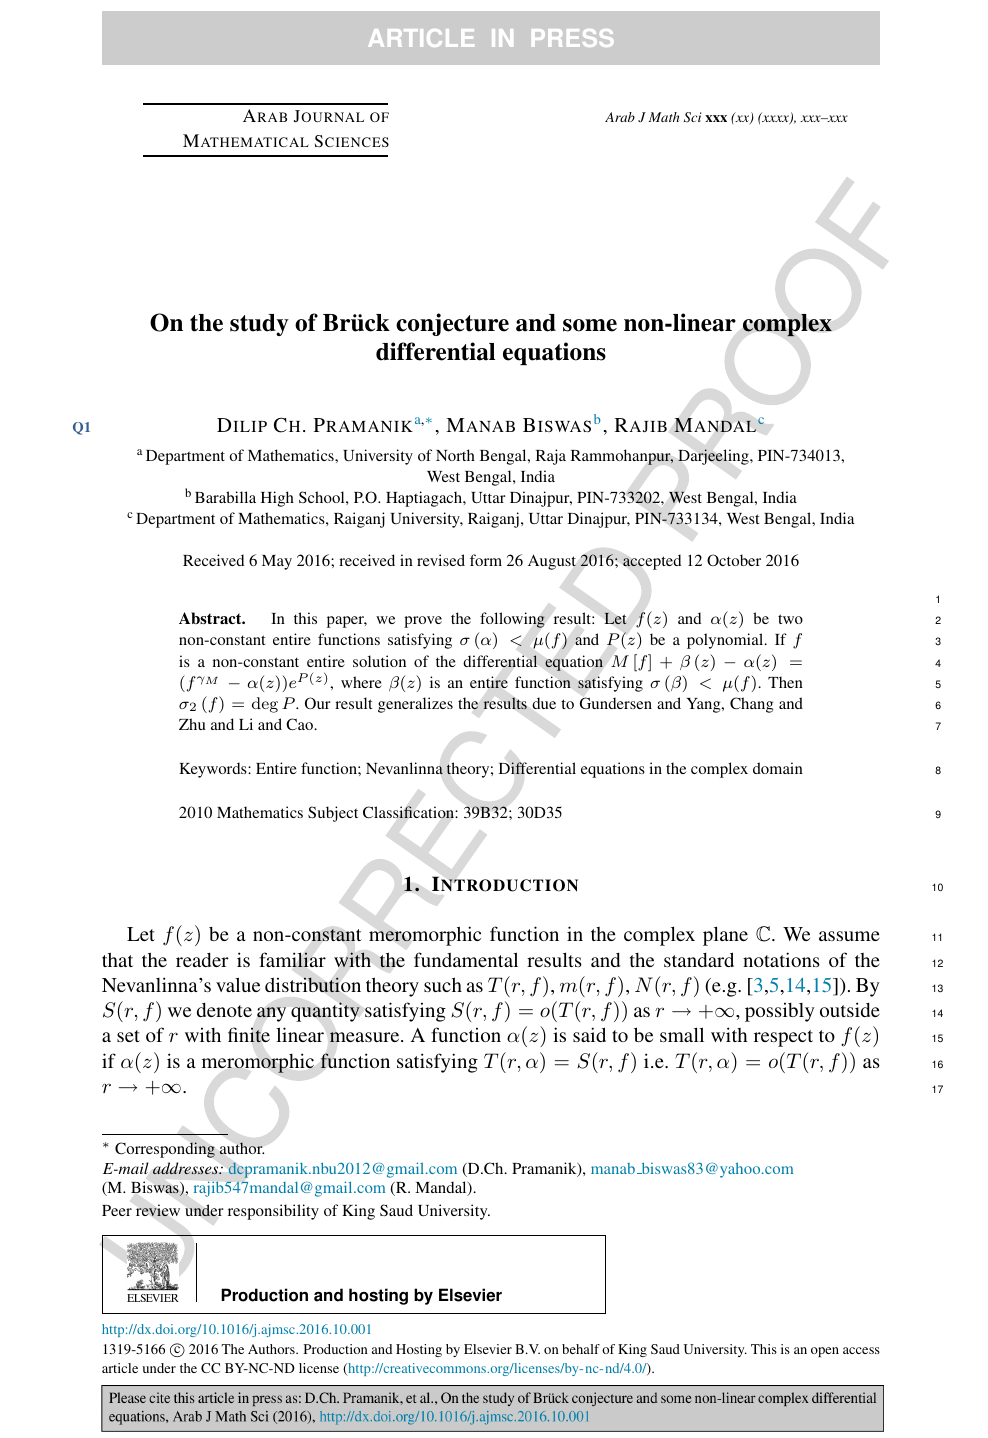 On The Study Of Bruck Conjecture And Some Non Linear Complex Differential Equations Topic Of Research Paper In Mathematics Download Scholarly Article Pdf And Read For Free On Cyberleninka Open Science Hub